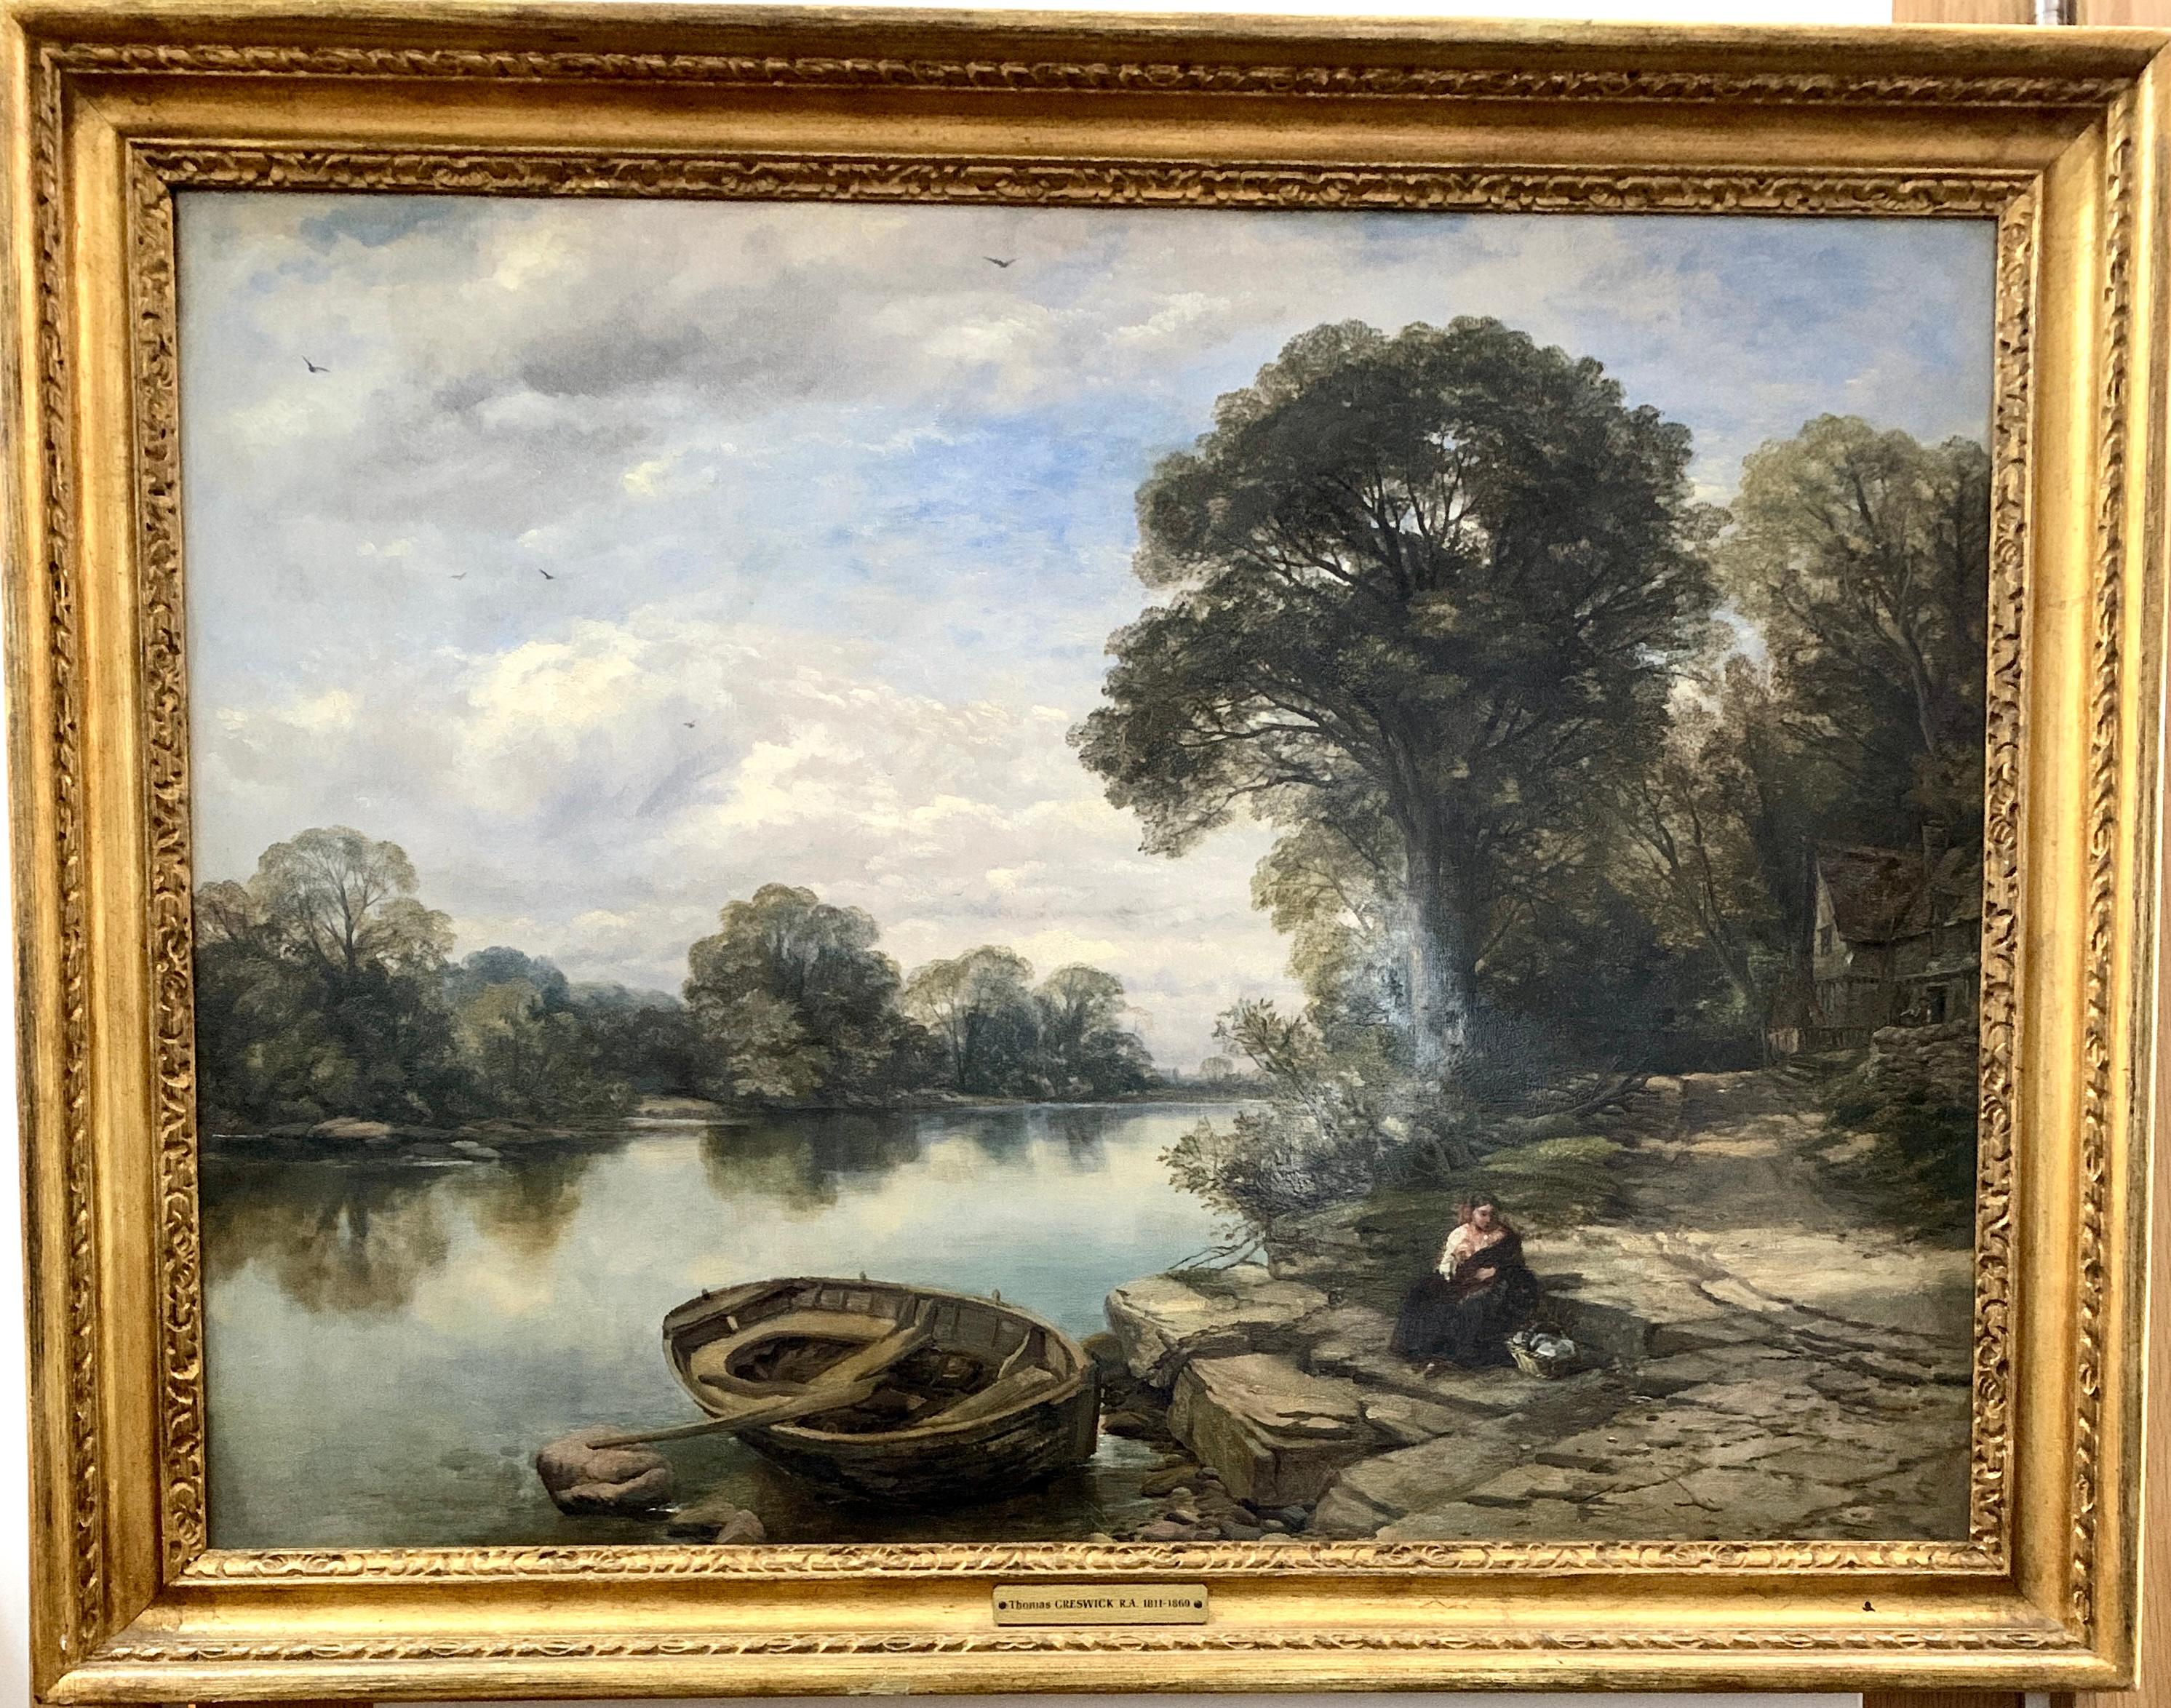 Thomas Creswick Landscape Painting - 19th century Antique English river landscape with cottage and woman resting.